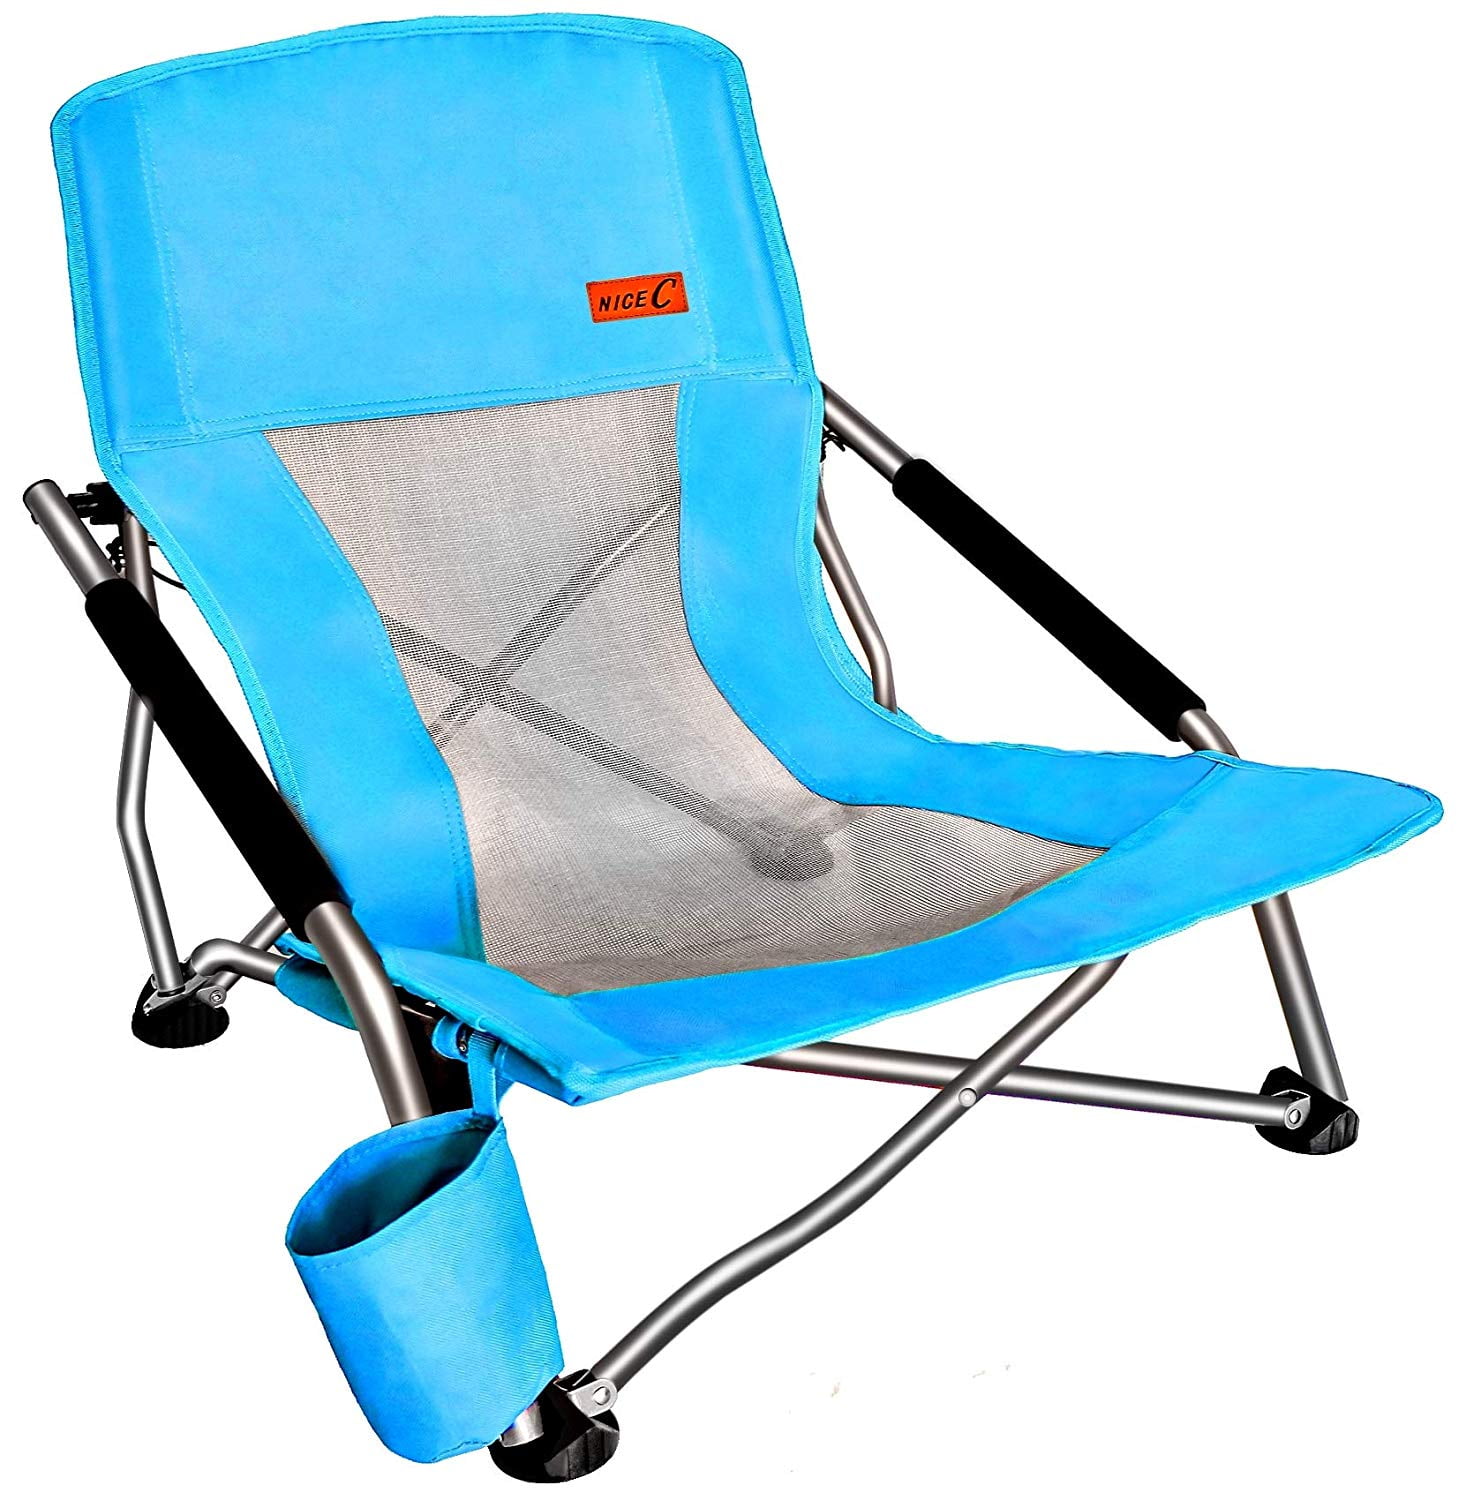 Folding Camping Chair Picnic Beach Outdoor Portable Seat Carry Bag Saucer Chair 